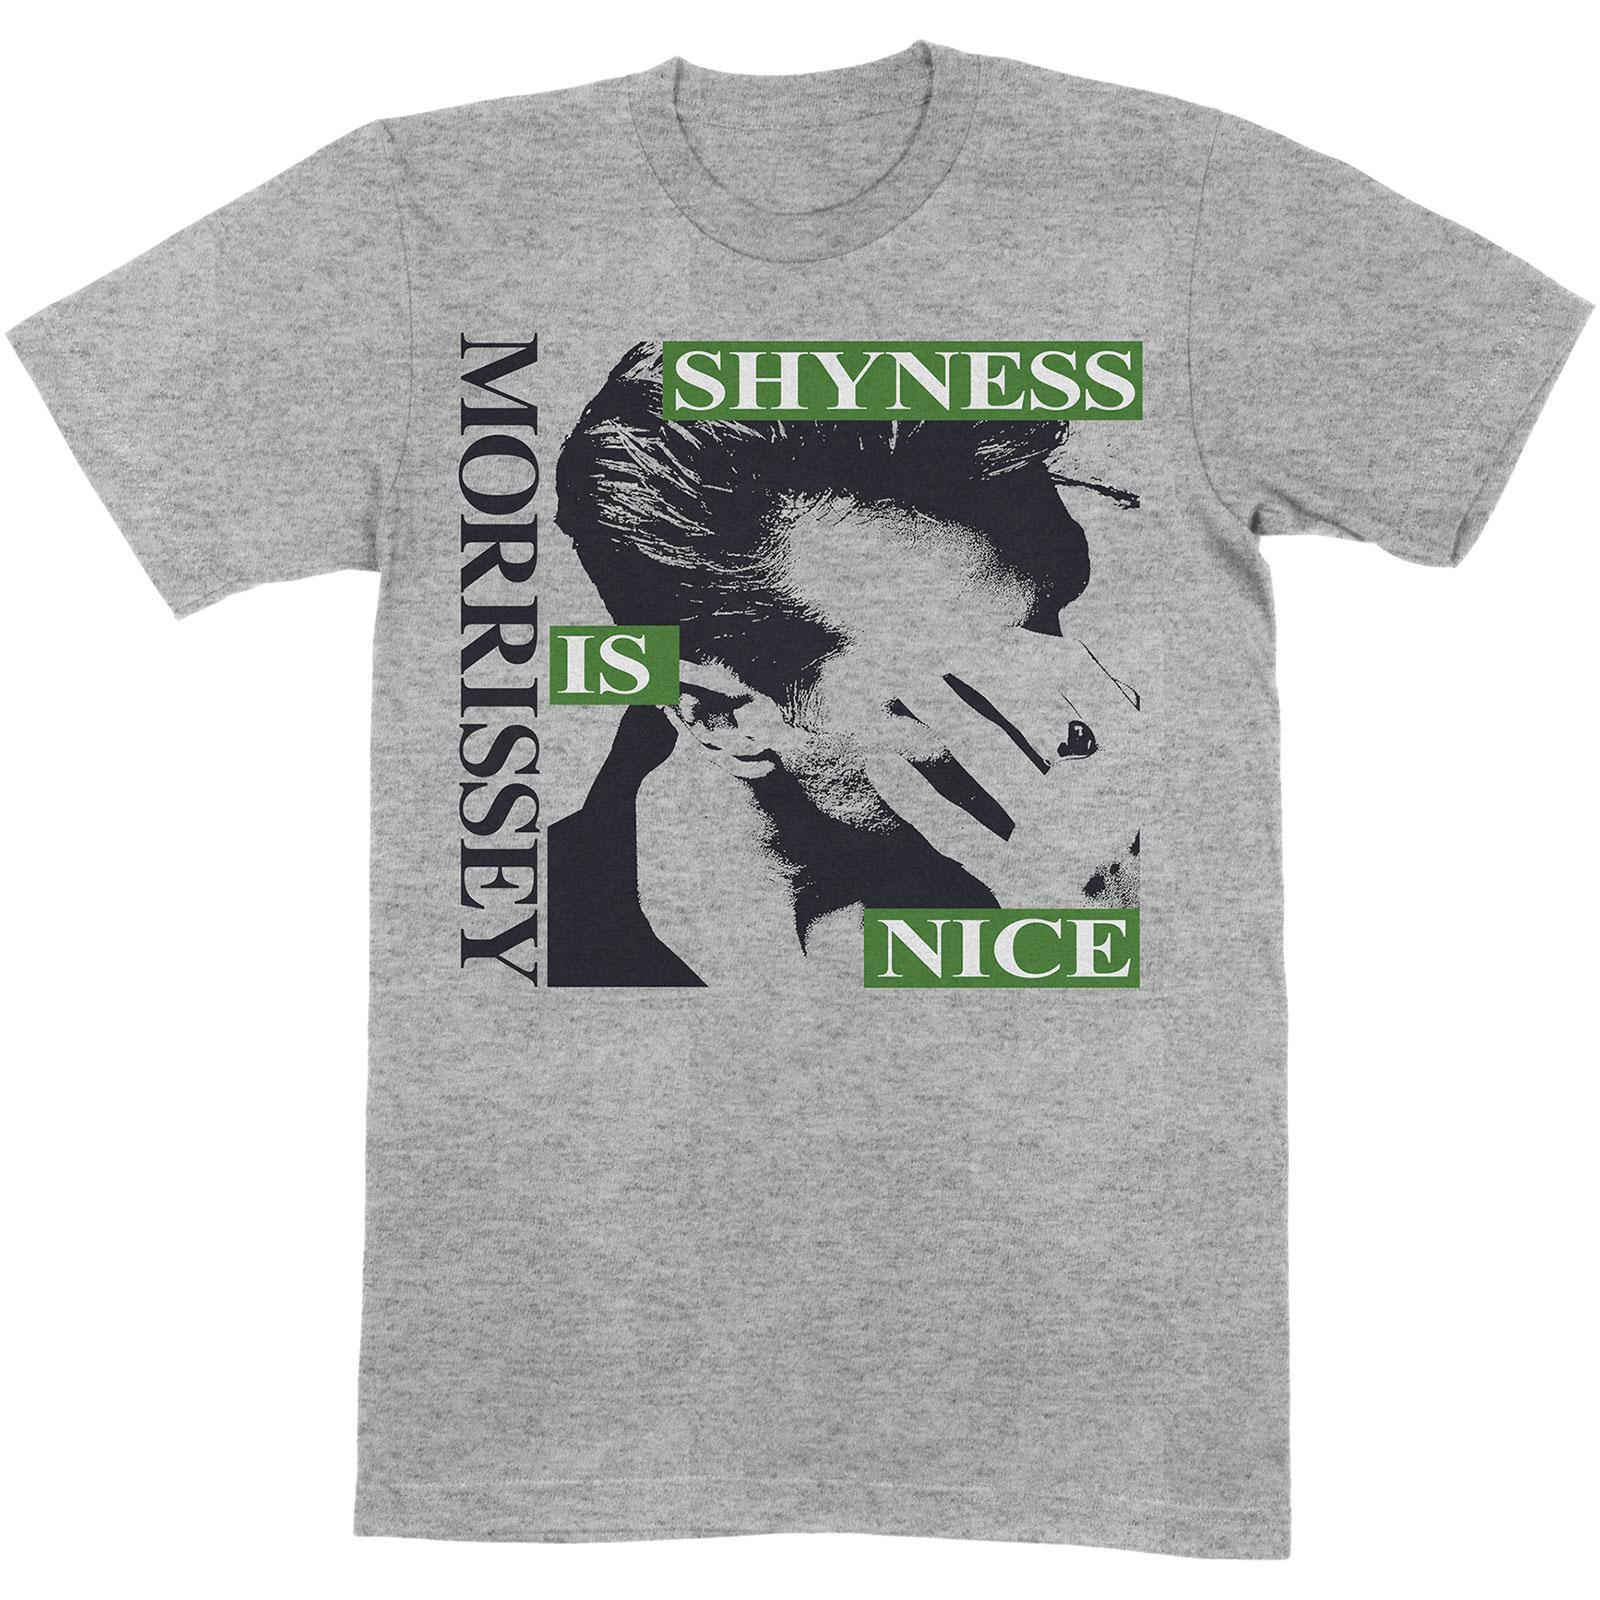 Morrissey Unisex Adult Shyness Is Nice Cotton T-Shirt (Grey) (XL)